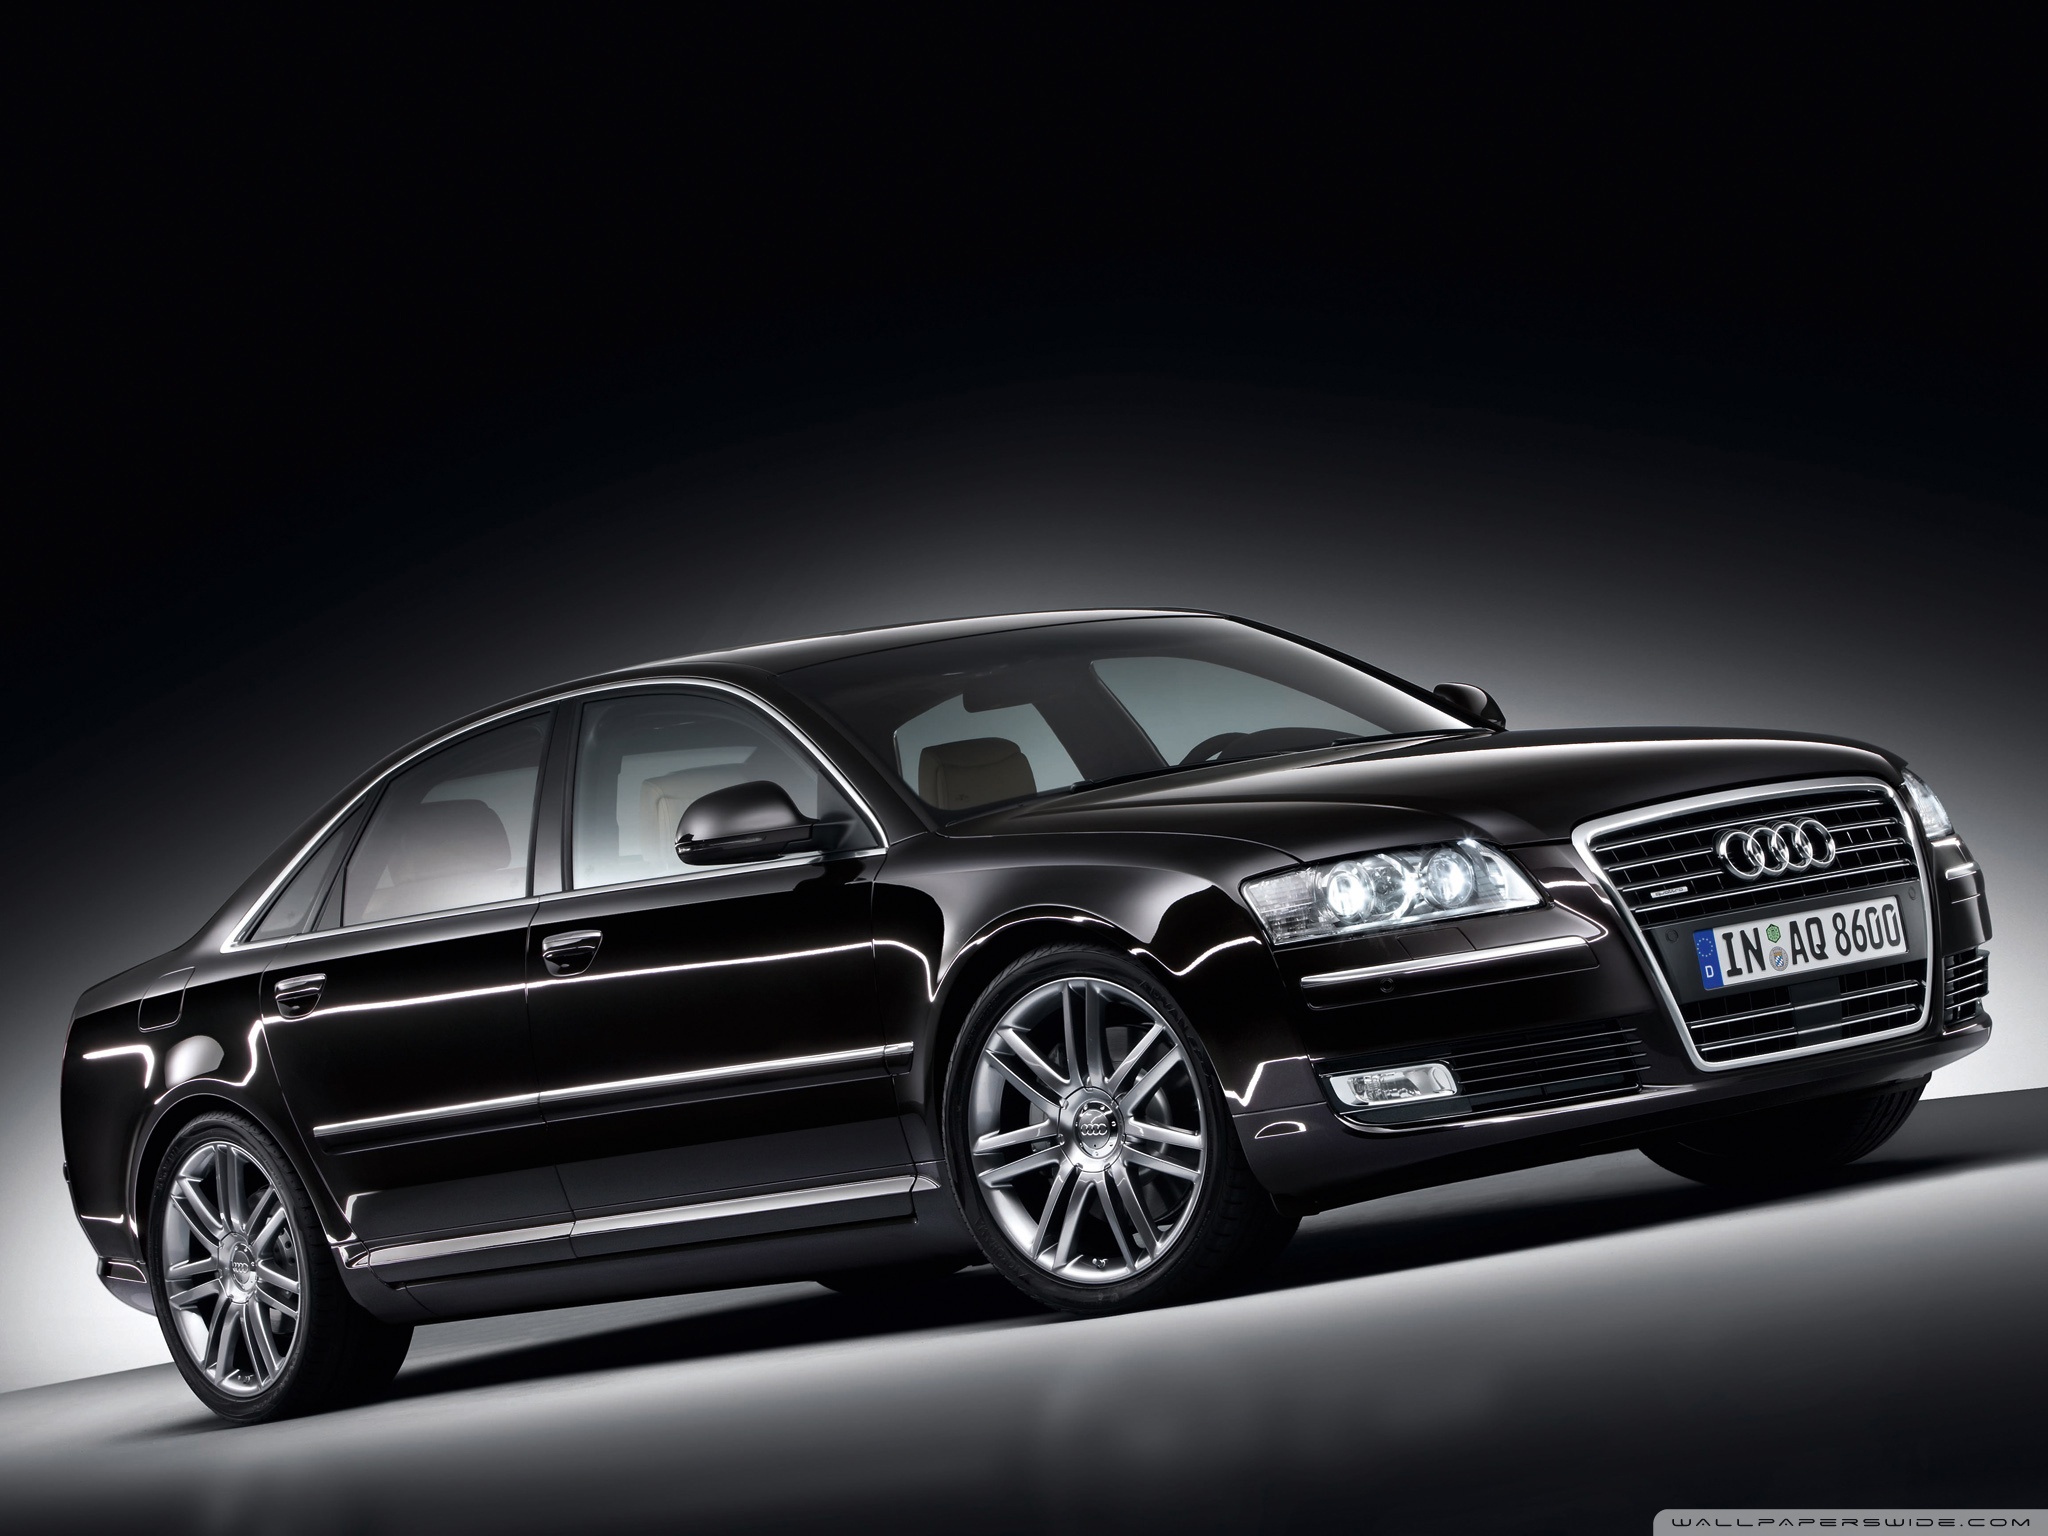 Related Wallpapers - Audi A8 Hd Wallpaper Black , HD Wallpaper & Backgrounds